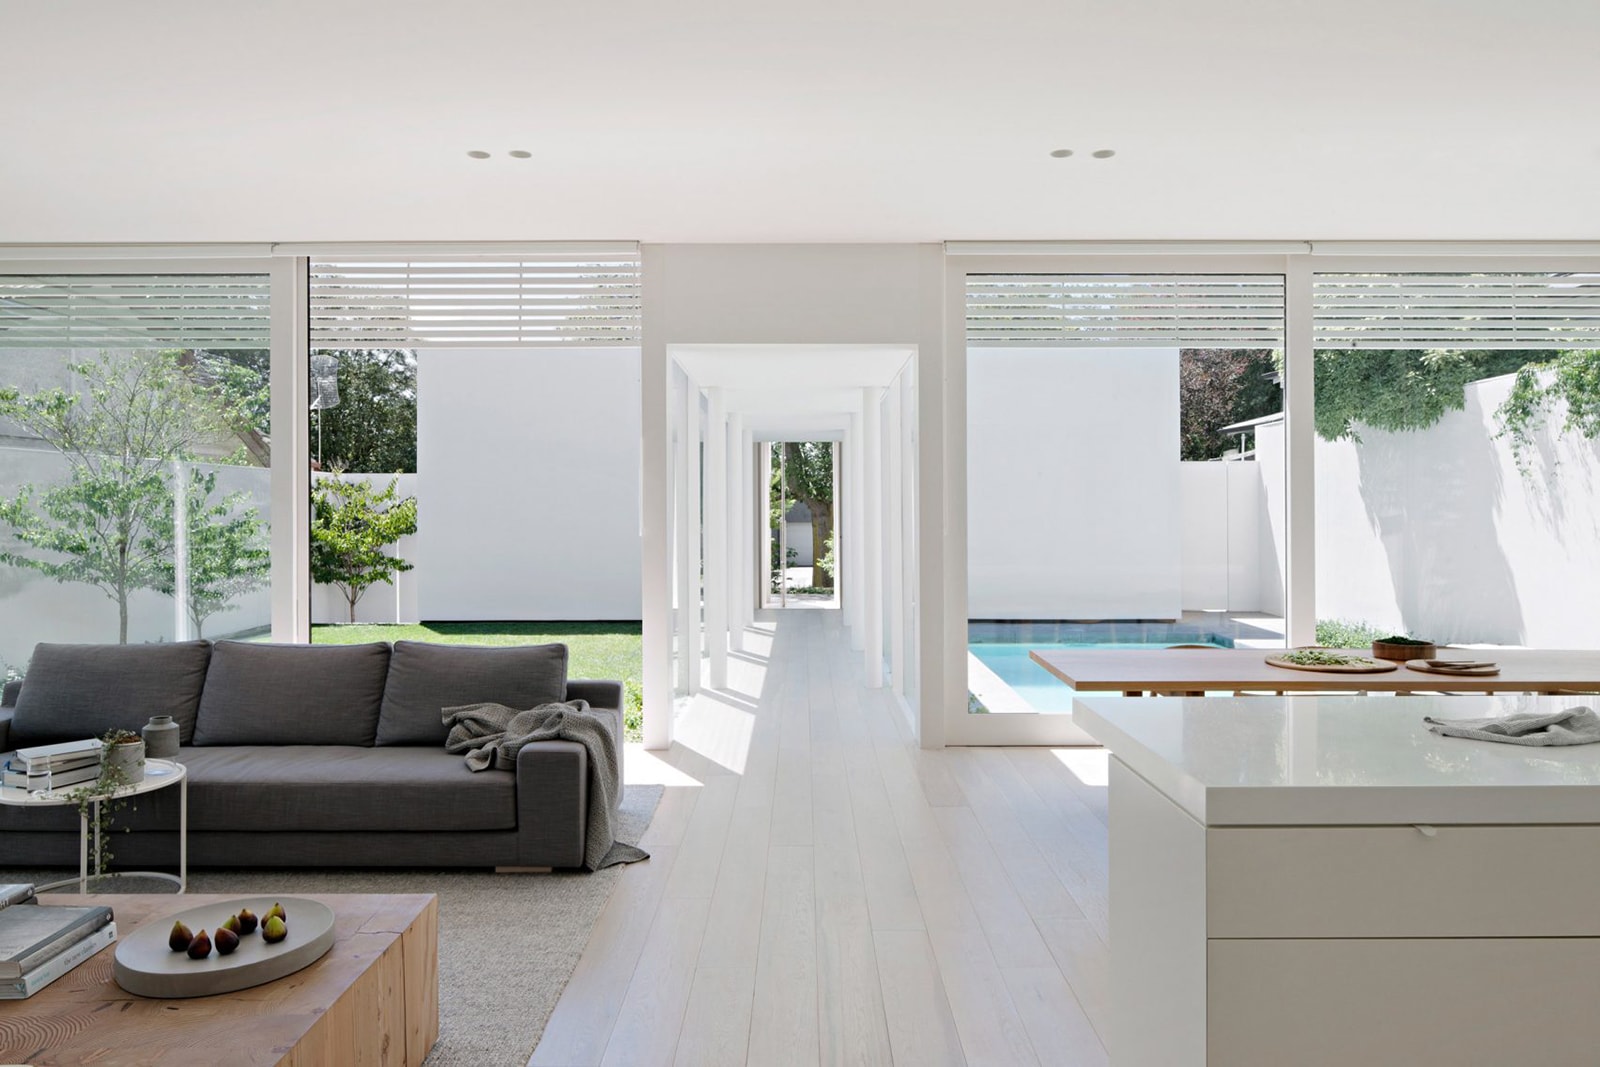 All White House by Studio Four Architecture in Melbourne Australia Homes Houses Sleek Simplistic Modern Interior Exterior Swimming Pool